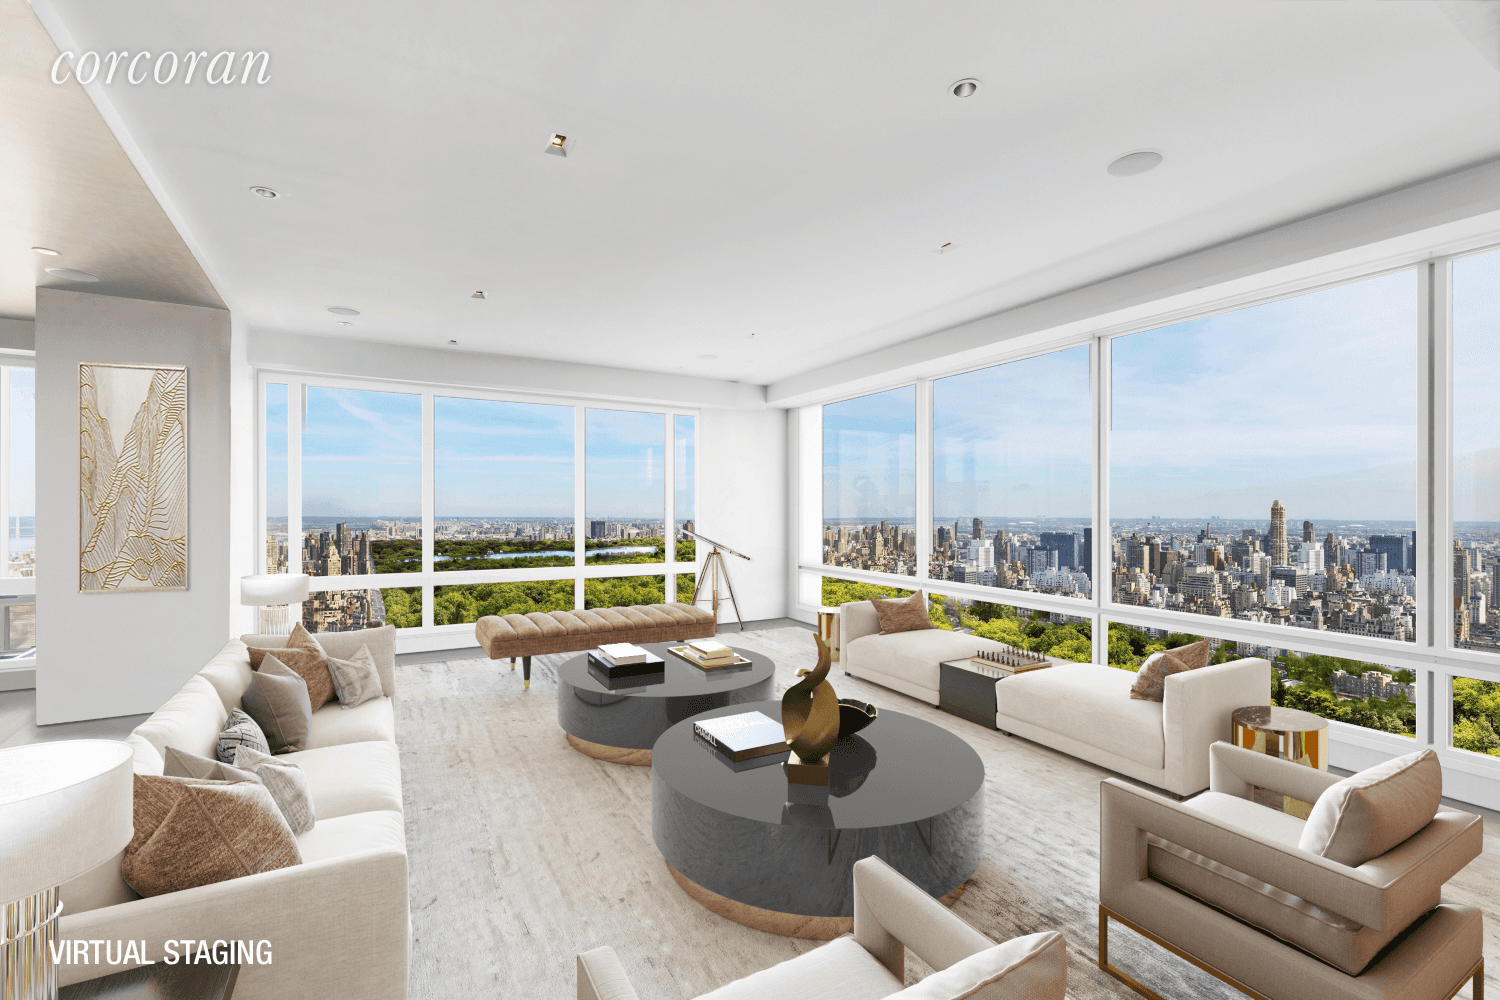 Penthouse 50A is a luxurious corner 4, 500 square foot home that sits high atop the city with breathtaking panoramic views from three open exposures showcasing the entire span of ...